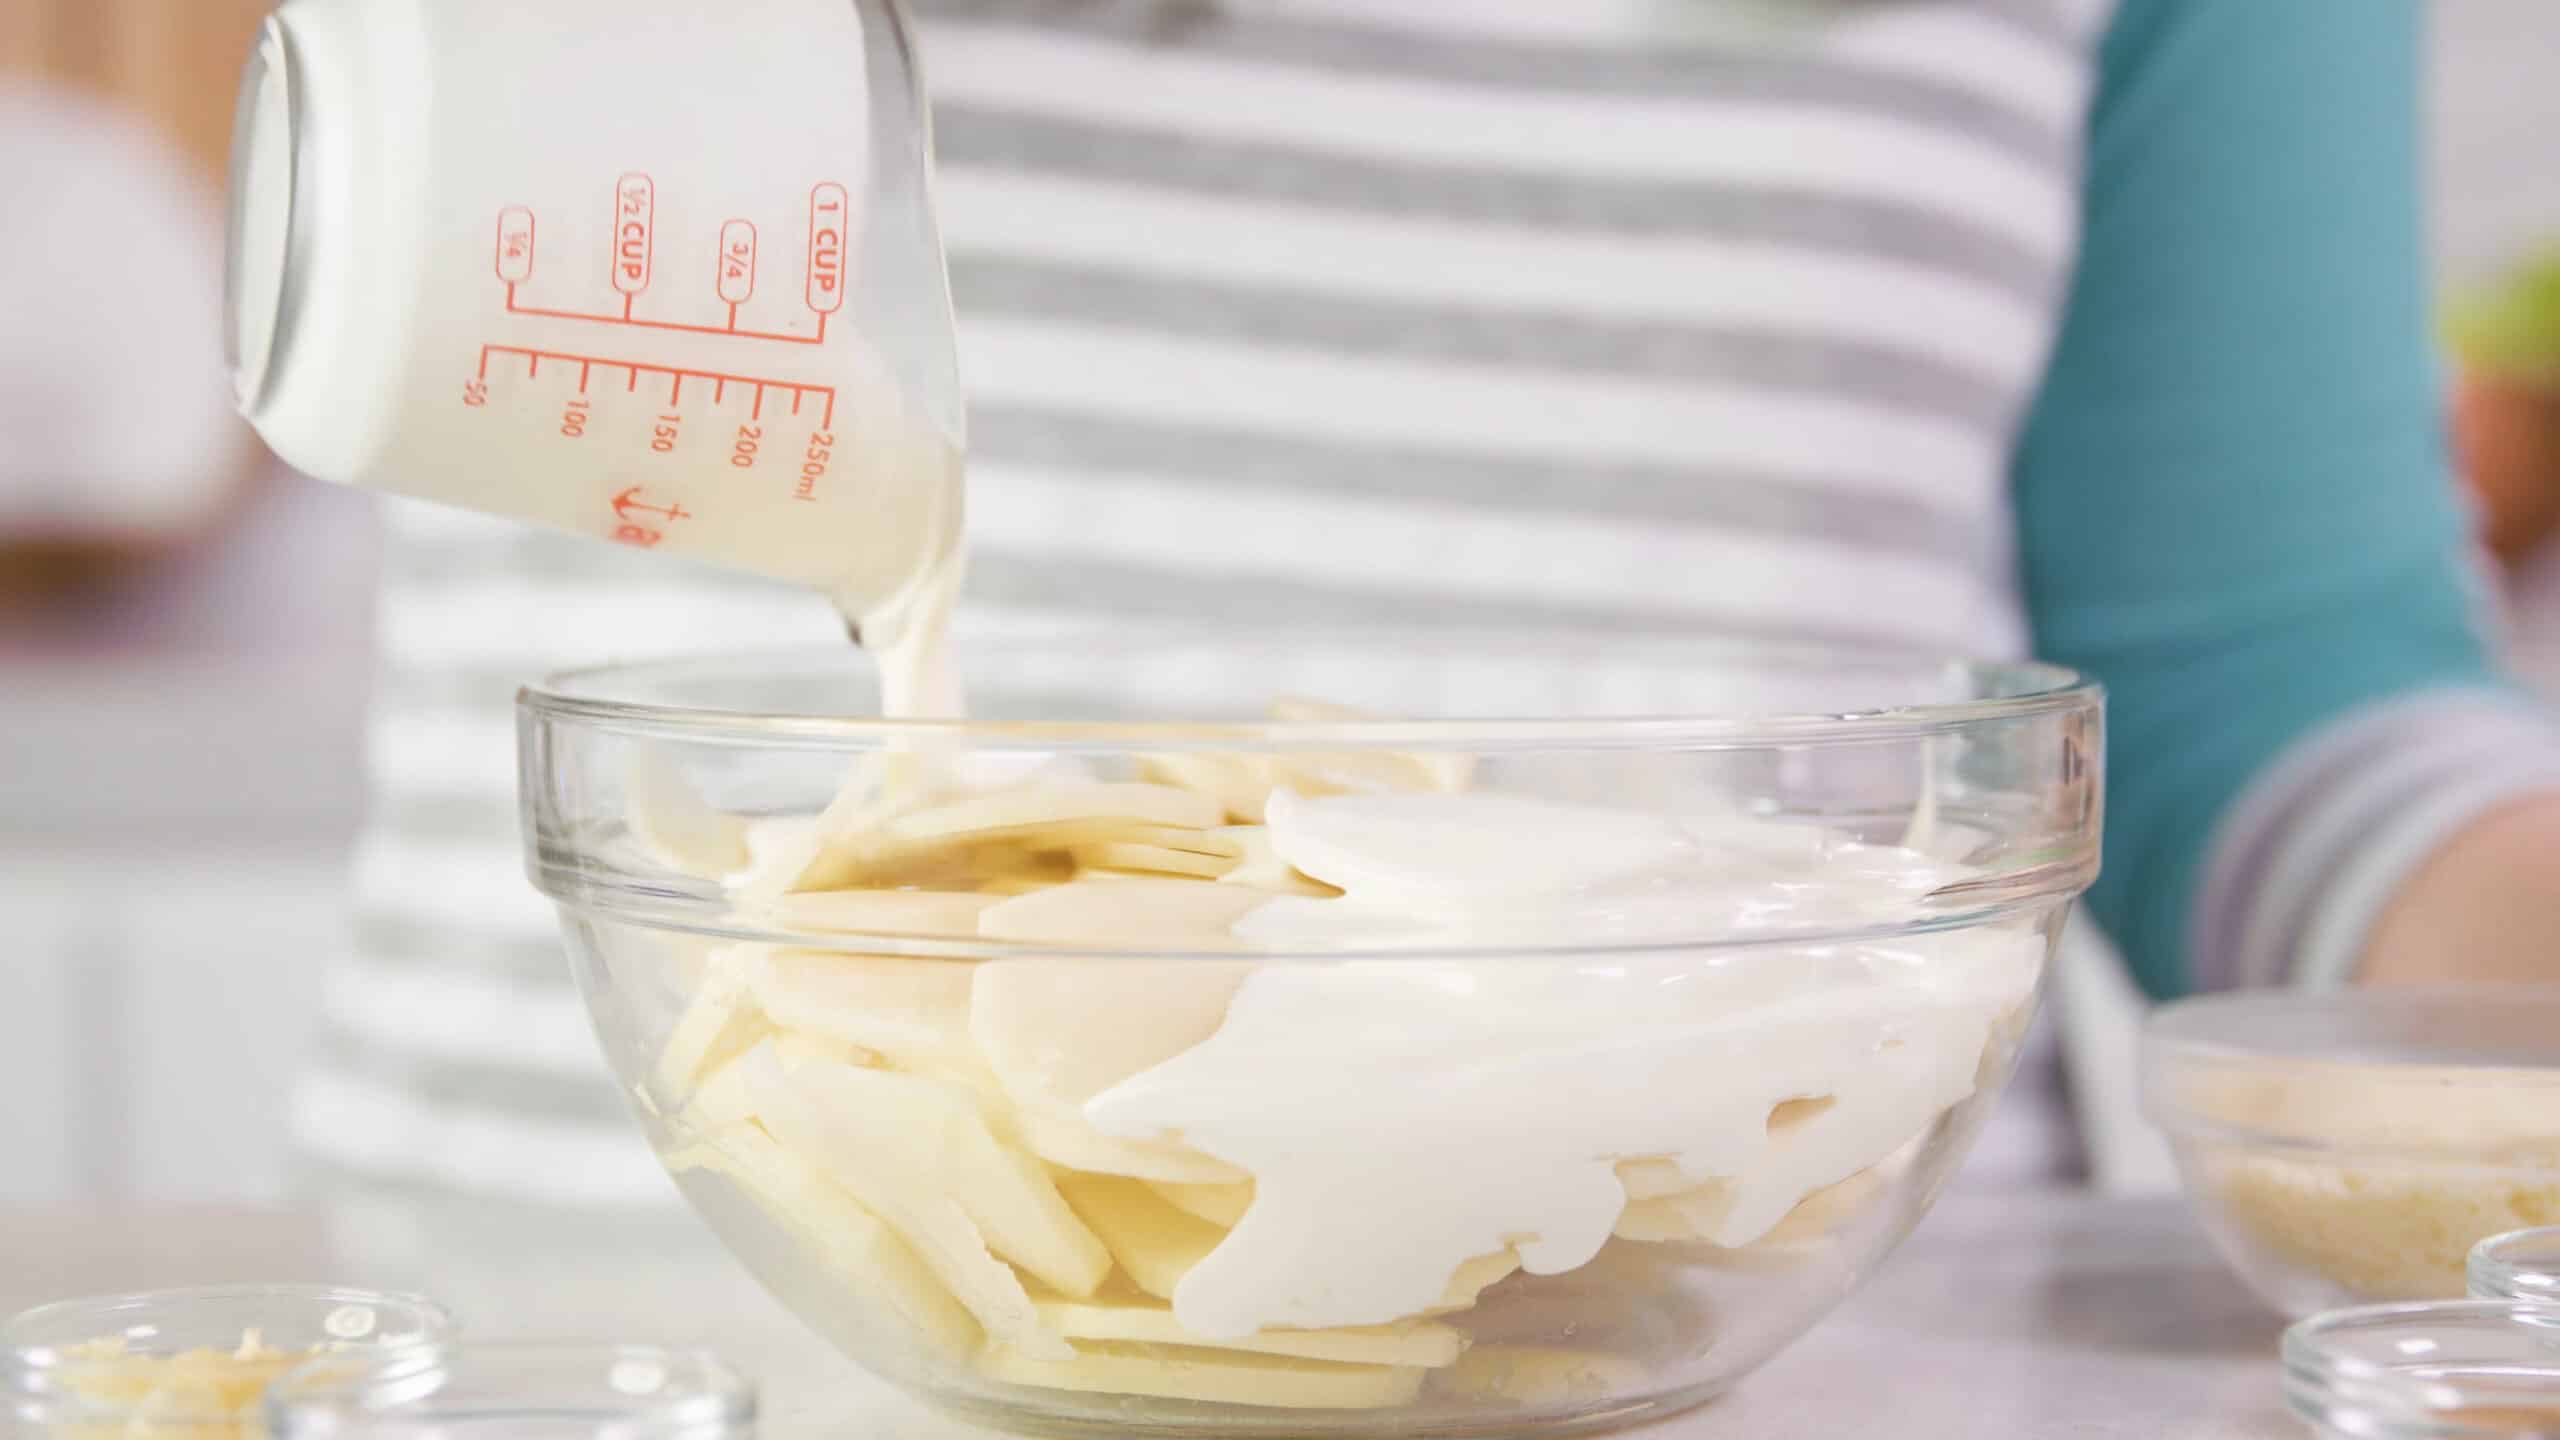 Side view of large glass mixing bowl filled with thinly sliced russet potatoes and heavy cream being poured on top from a clear glass measuring cup.